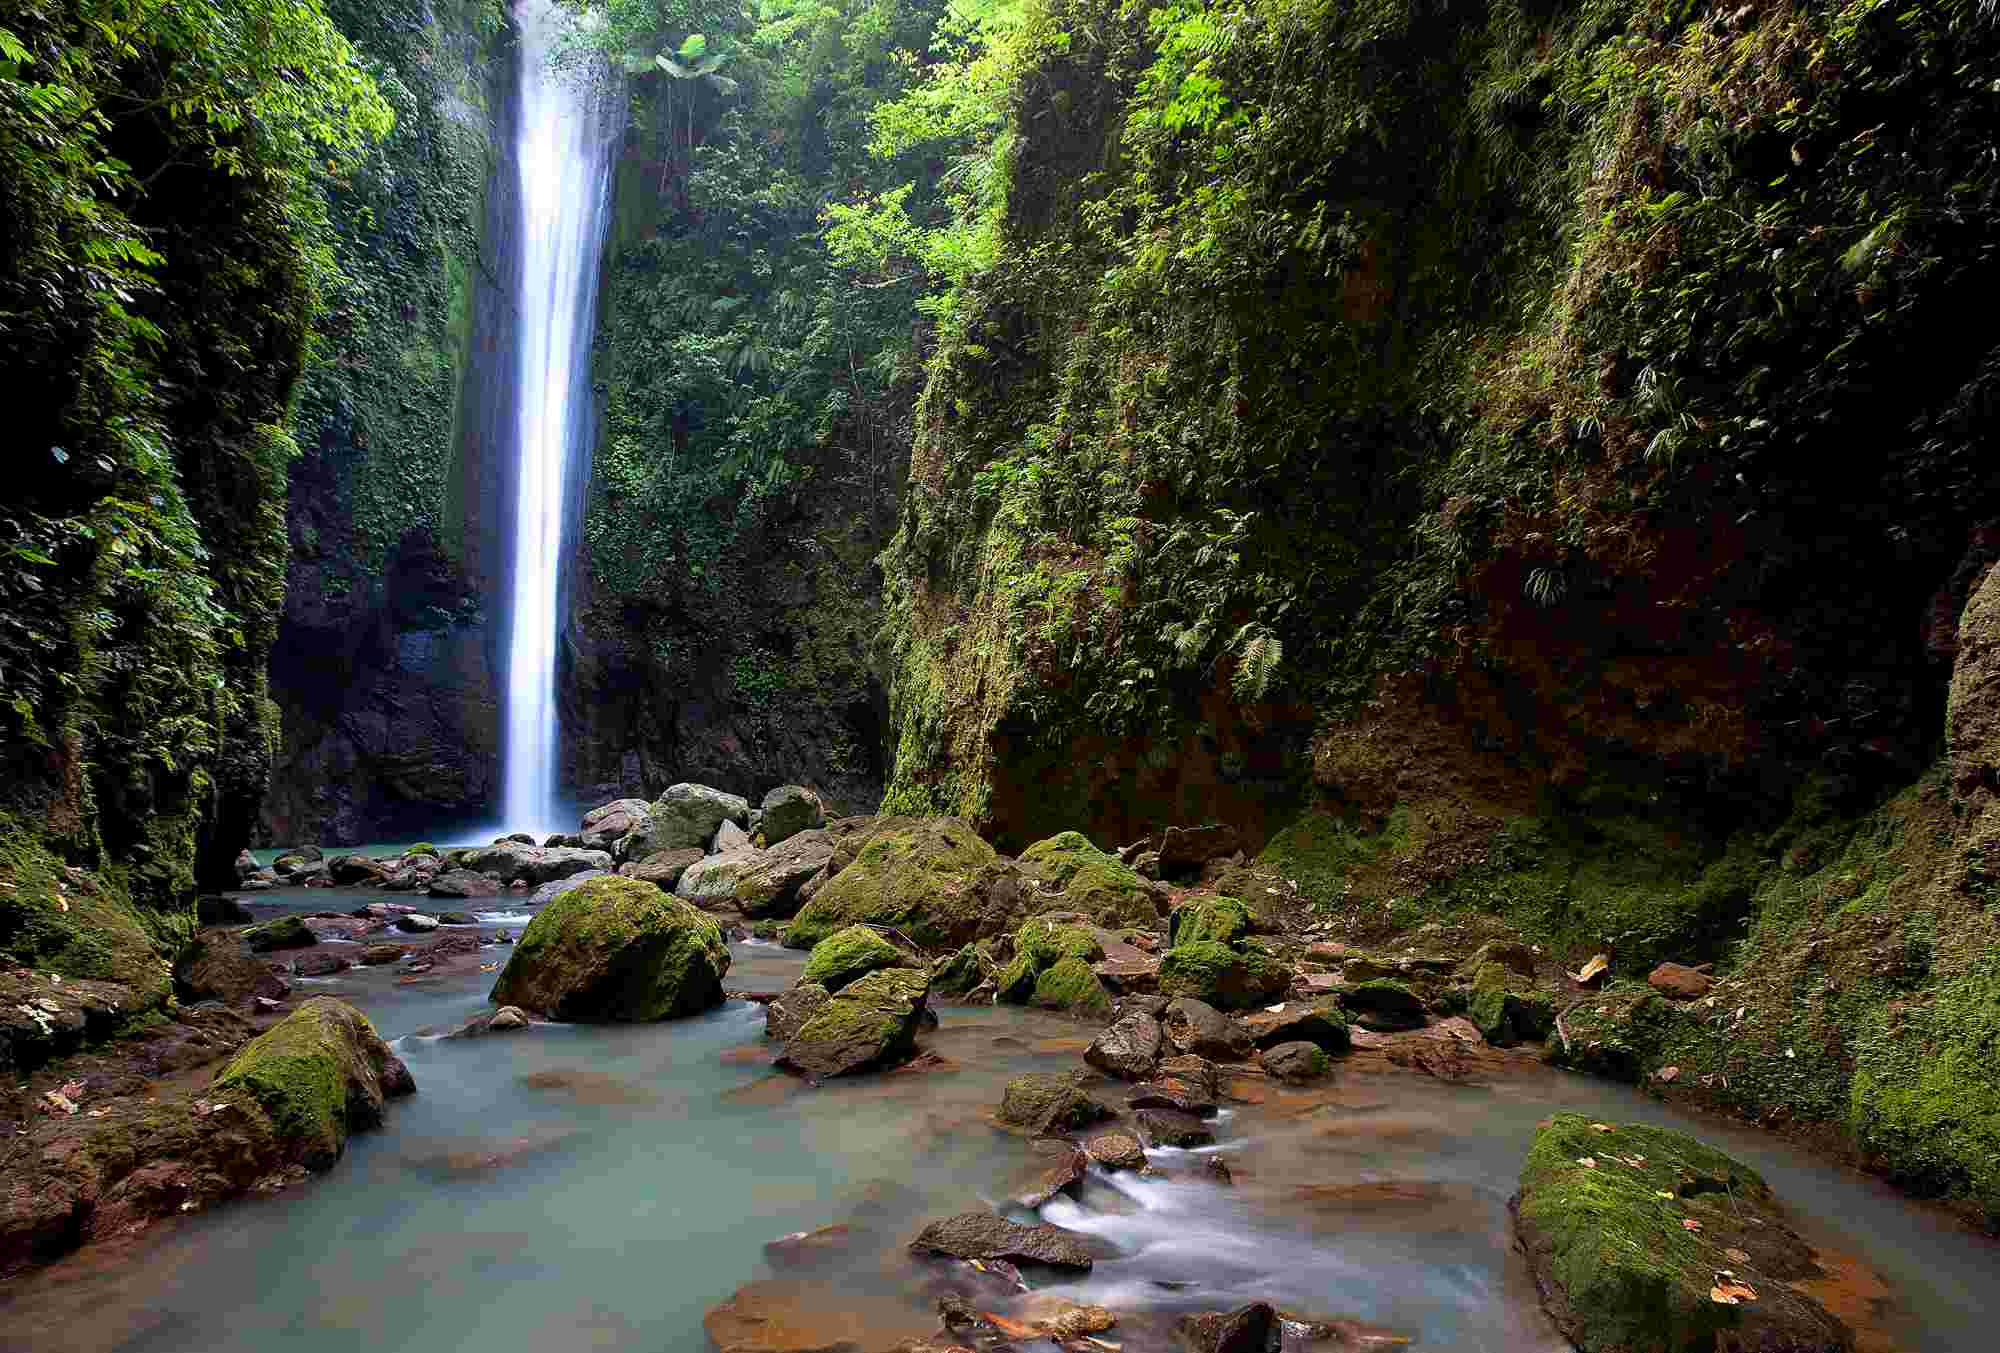 Casaroro Waterfalls surrounded by steep rock walls in Valencia in the Philippines. It is one of our 5 most popular excursions near Dumaguete